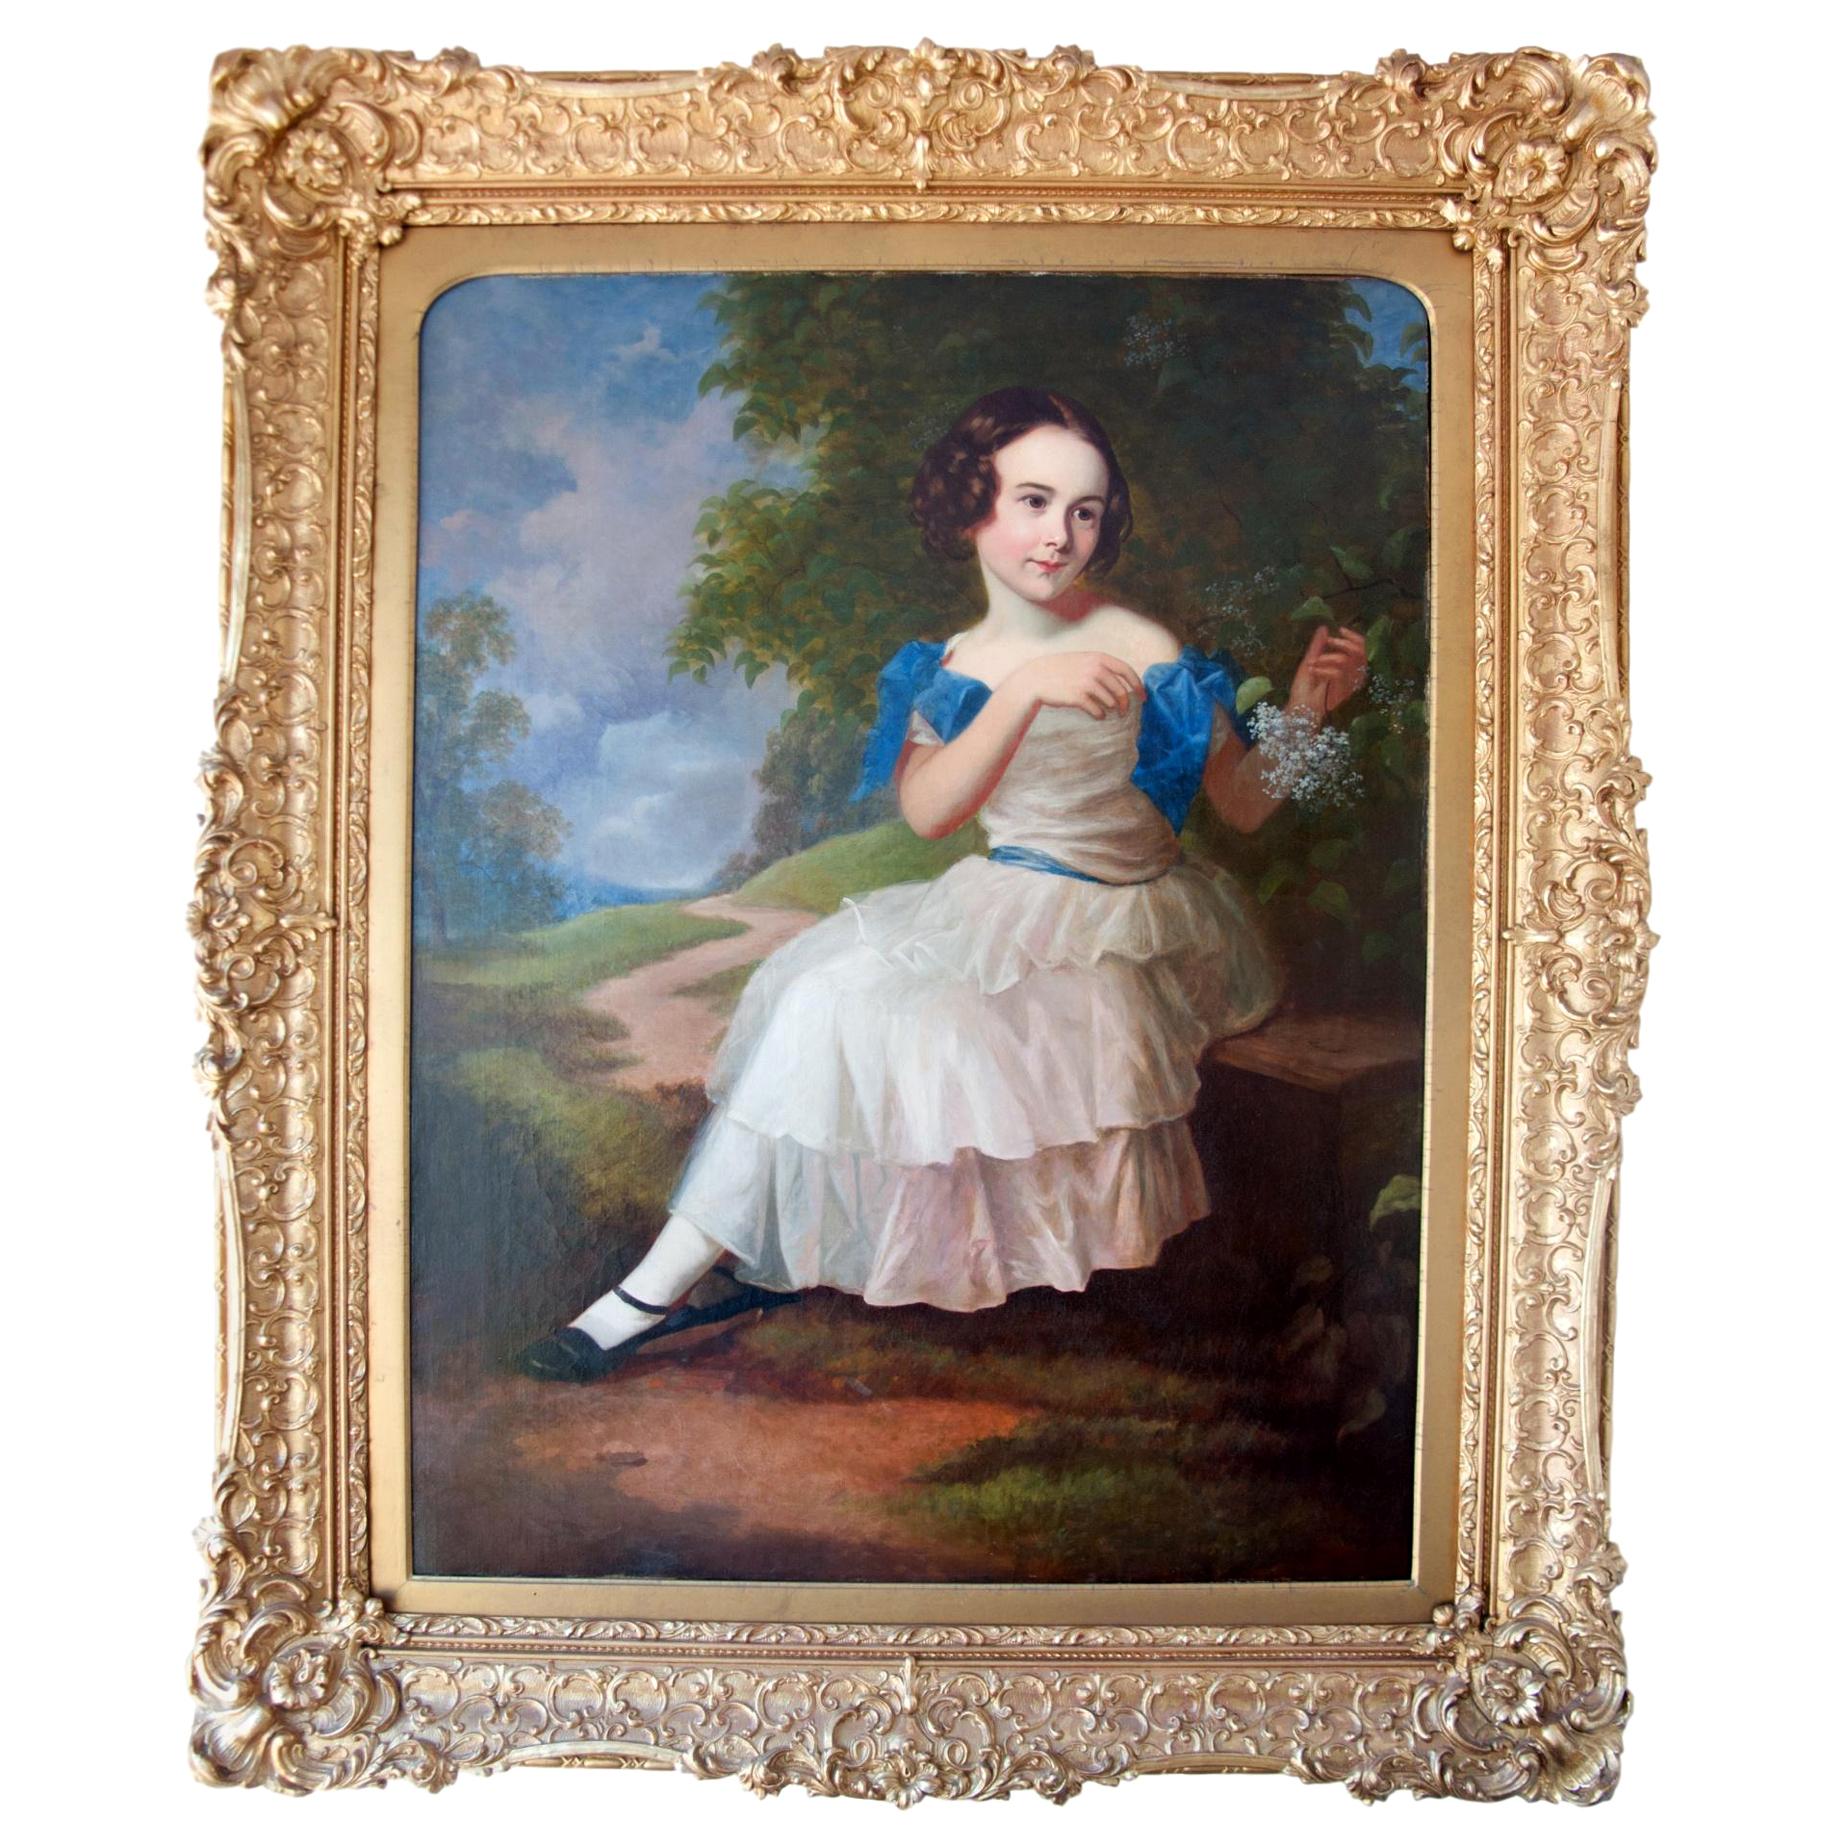 Early to Mid-19th Century Oil on Canvas Portrait of Young Girl, circa 1850